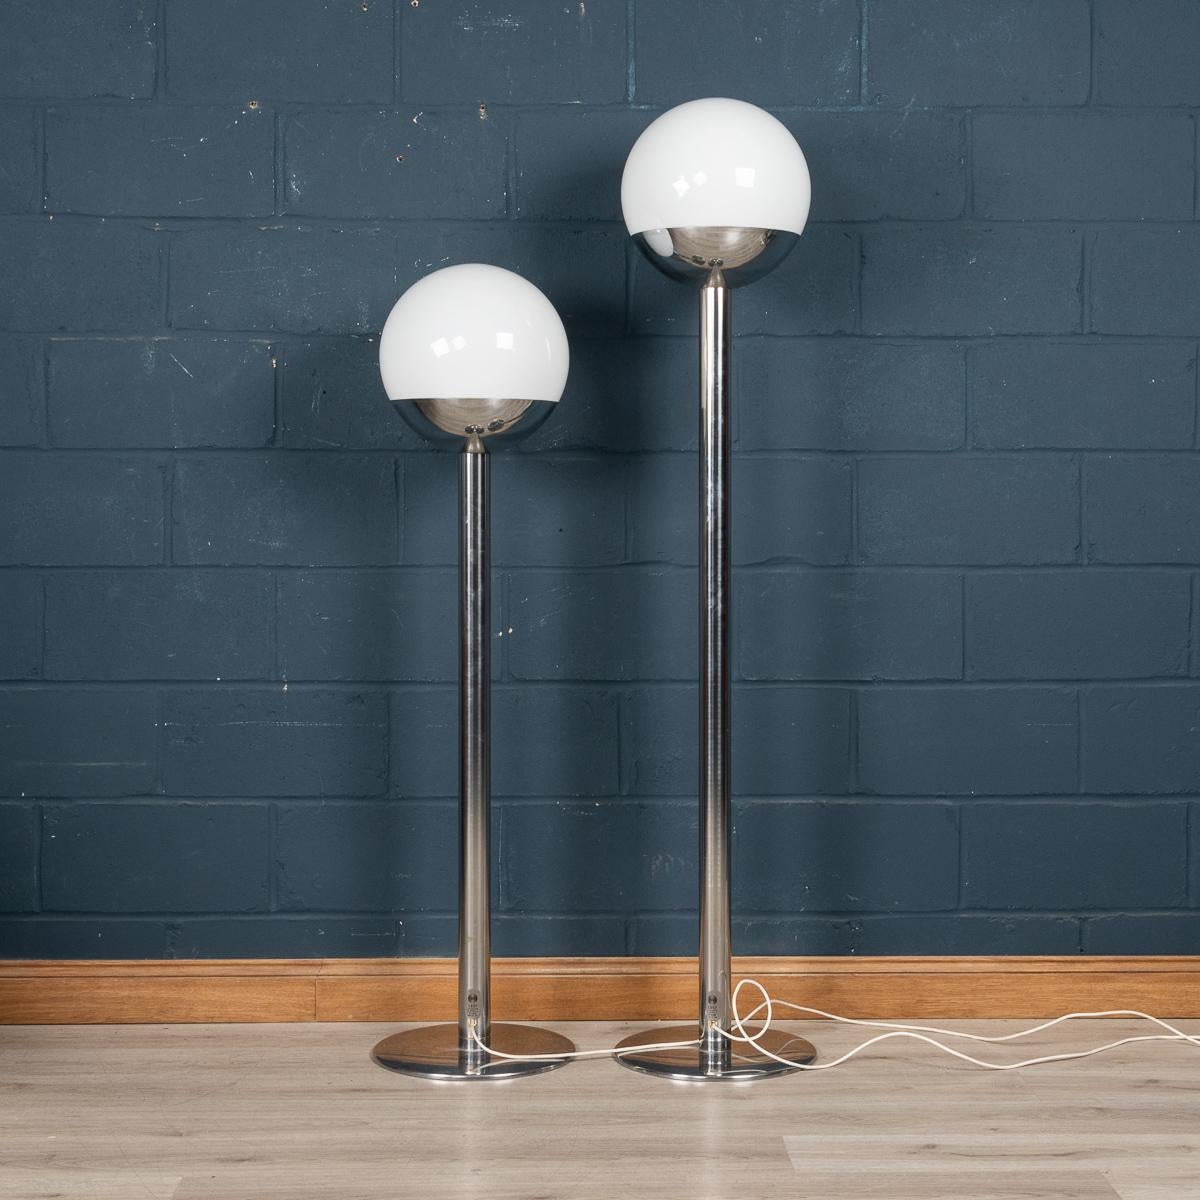 Metal Graduated Pair Of Floor Lamps, Pia Guidetti-Crippa For Luci Italia, c.1970 For Sale